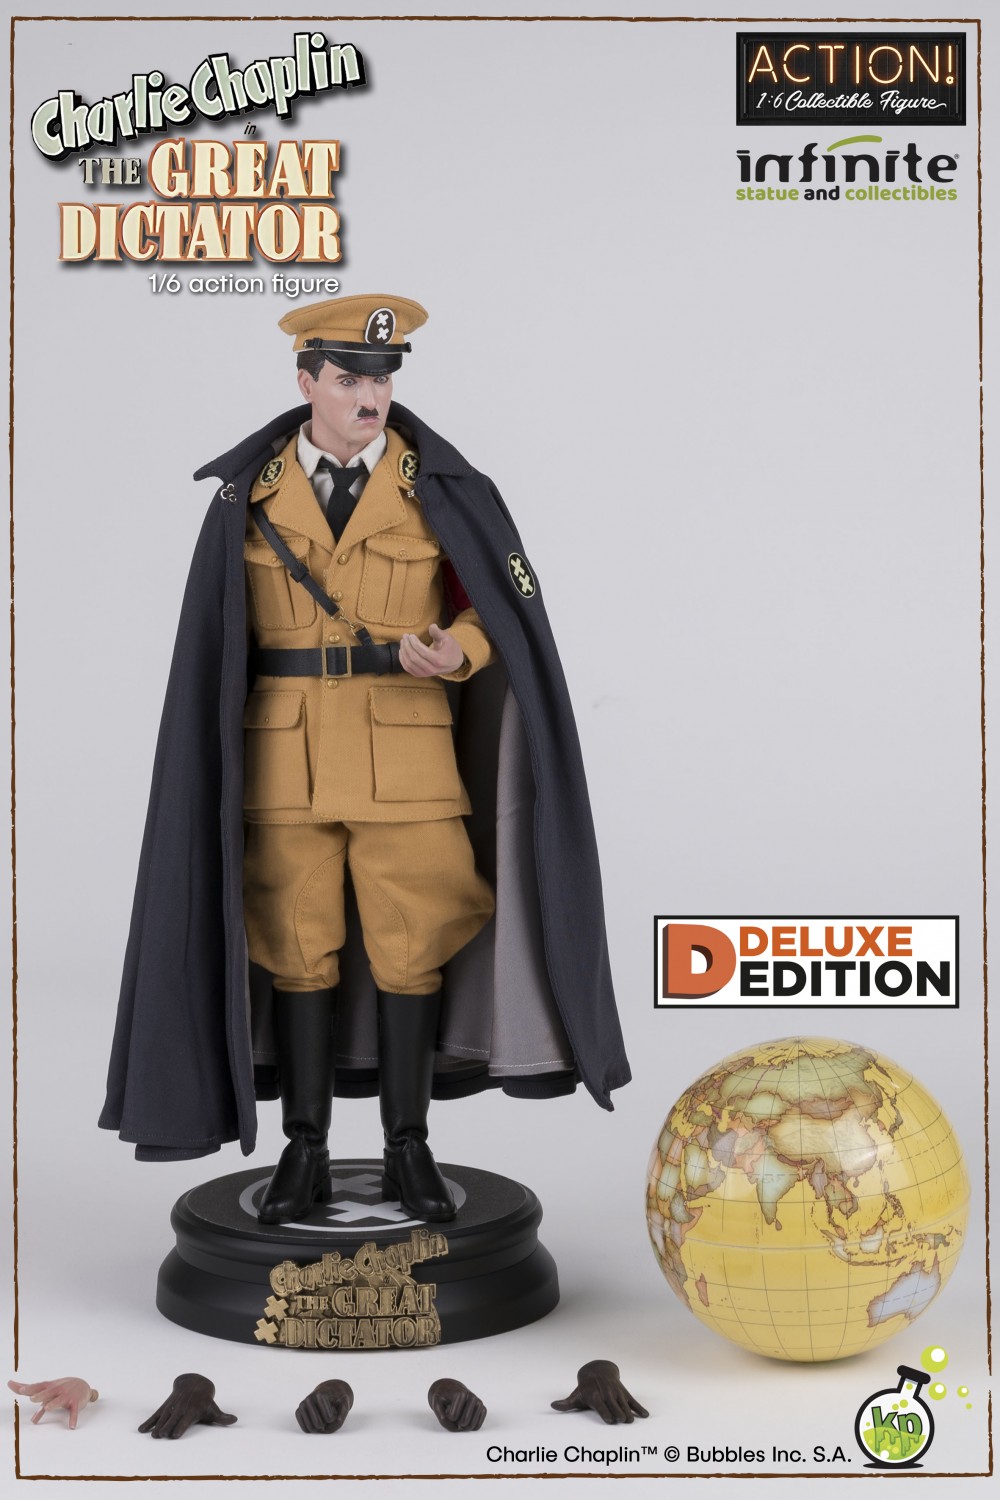 movie - NEW PRODUCT: Infinite Statue & Kaustic Plastik: CHARLIE CHAPLIN “THE GREAT DICTATOR”  1/6 ACTION FIGURE 10456